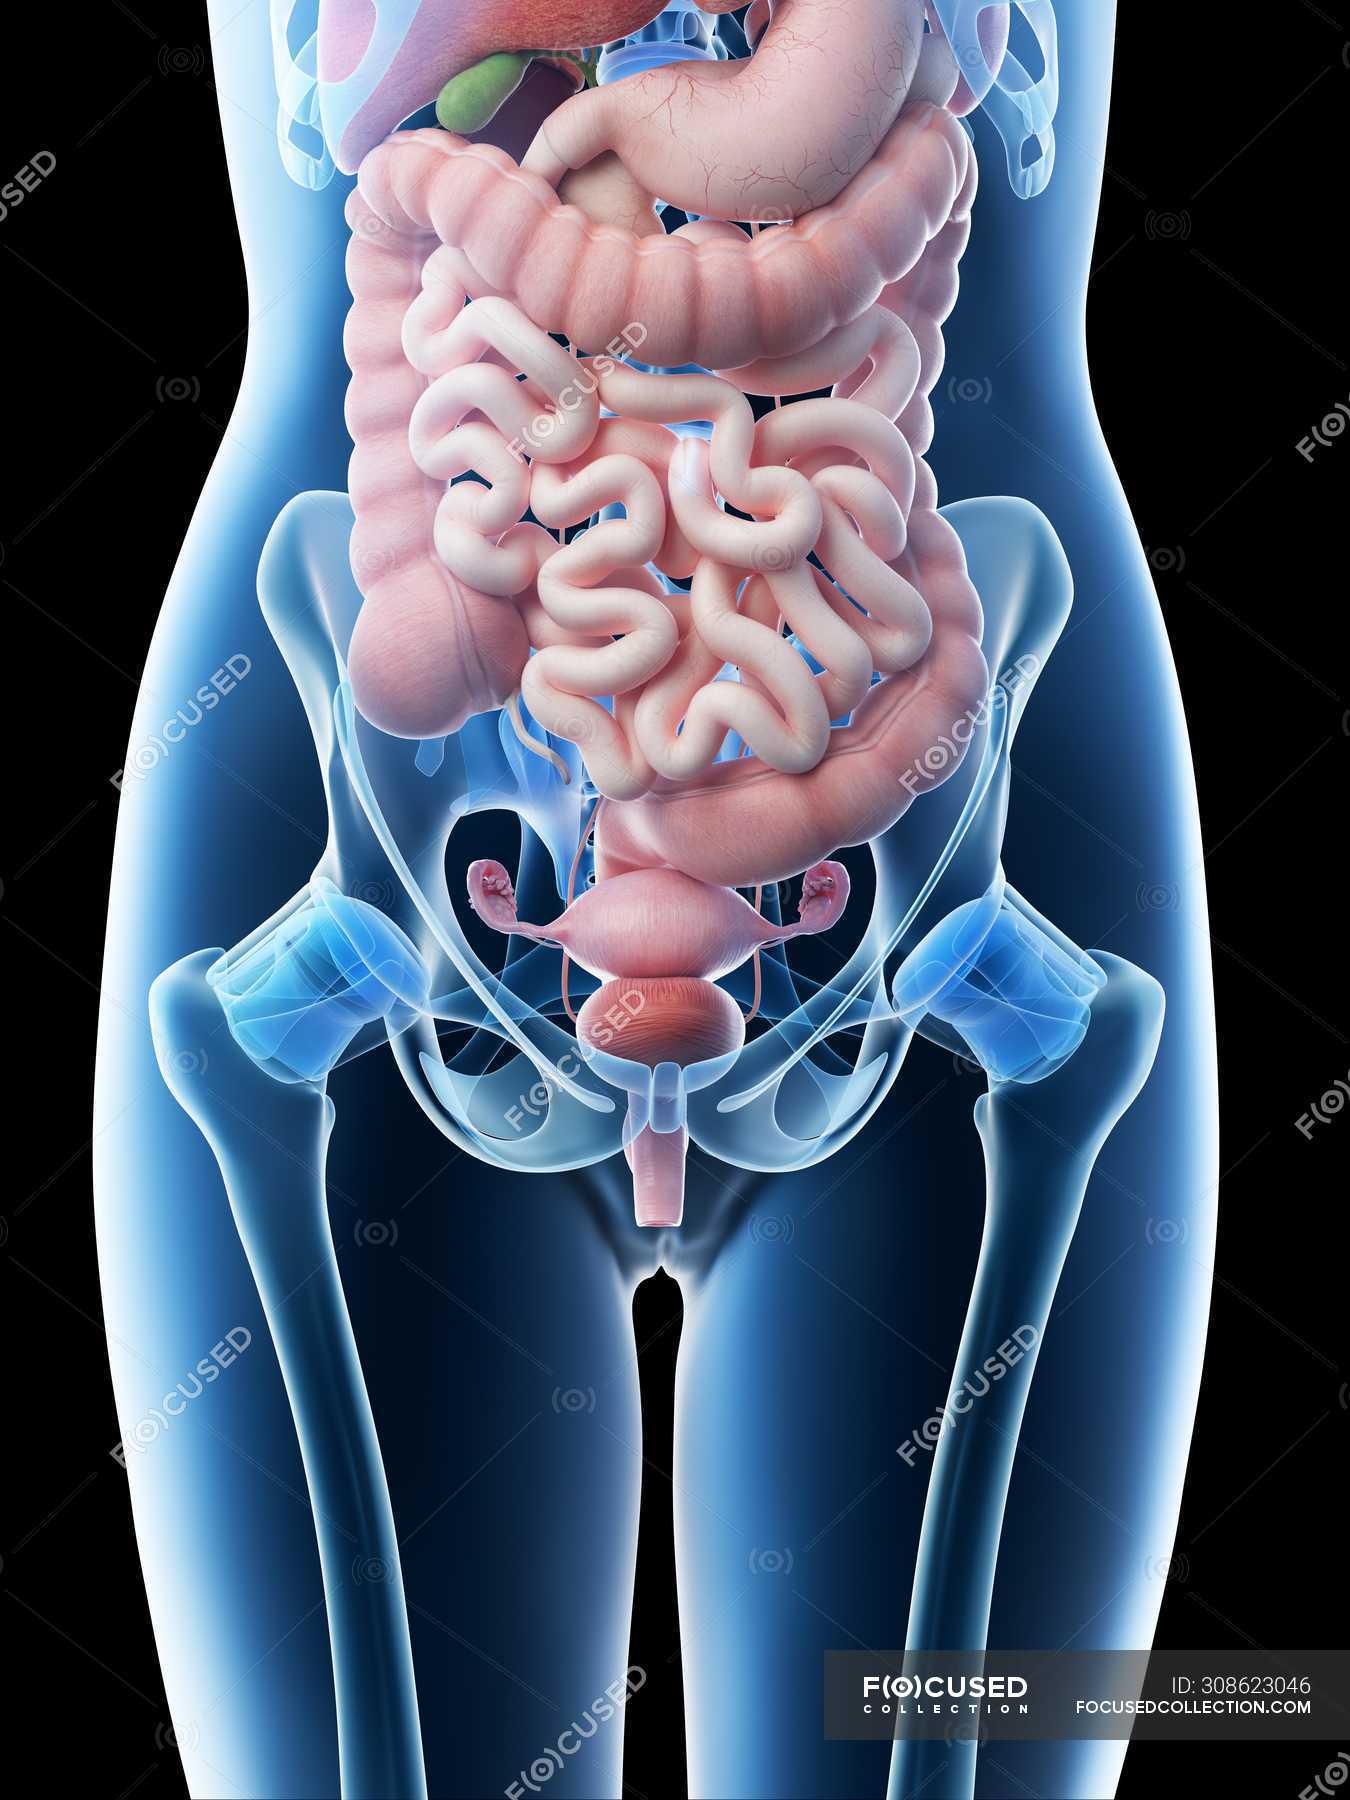 Female Abdominal Anatomy Pictures / Stock Images Female Abdominal